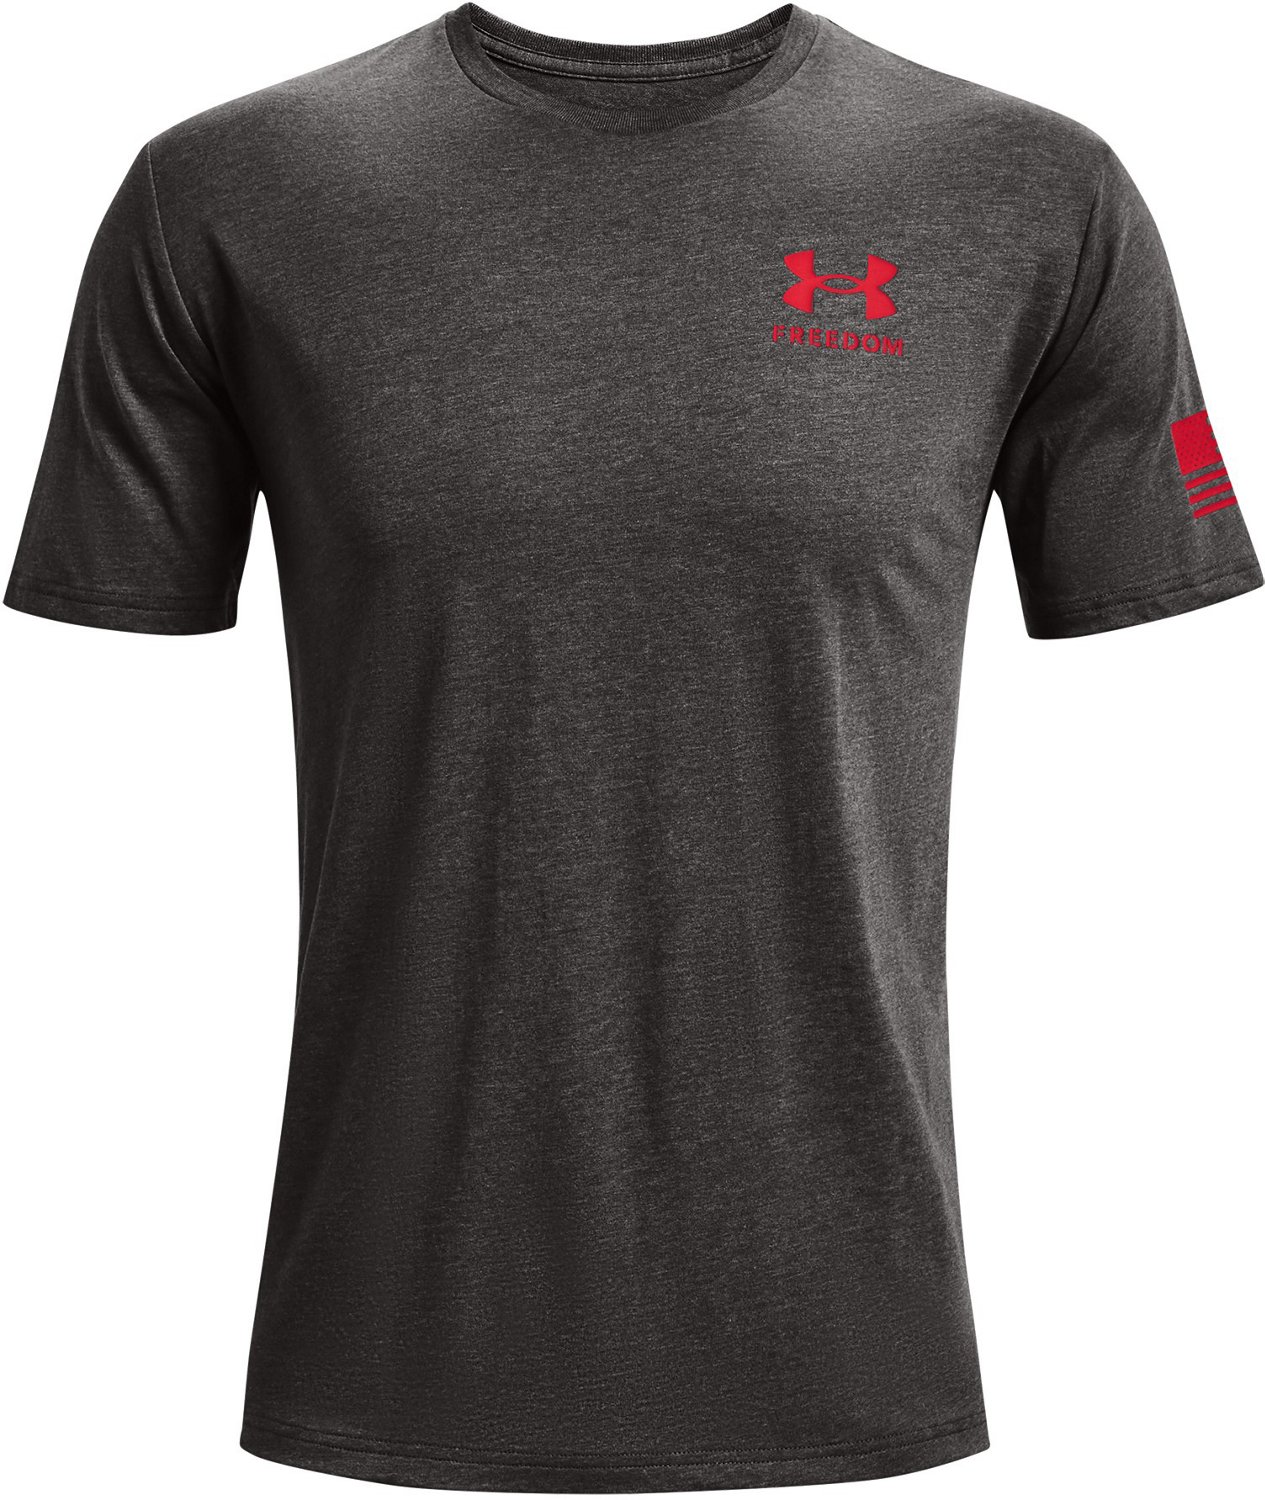 Under Armour New Freedom Flag Tee, Shirts, Clothing & Accessories